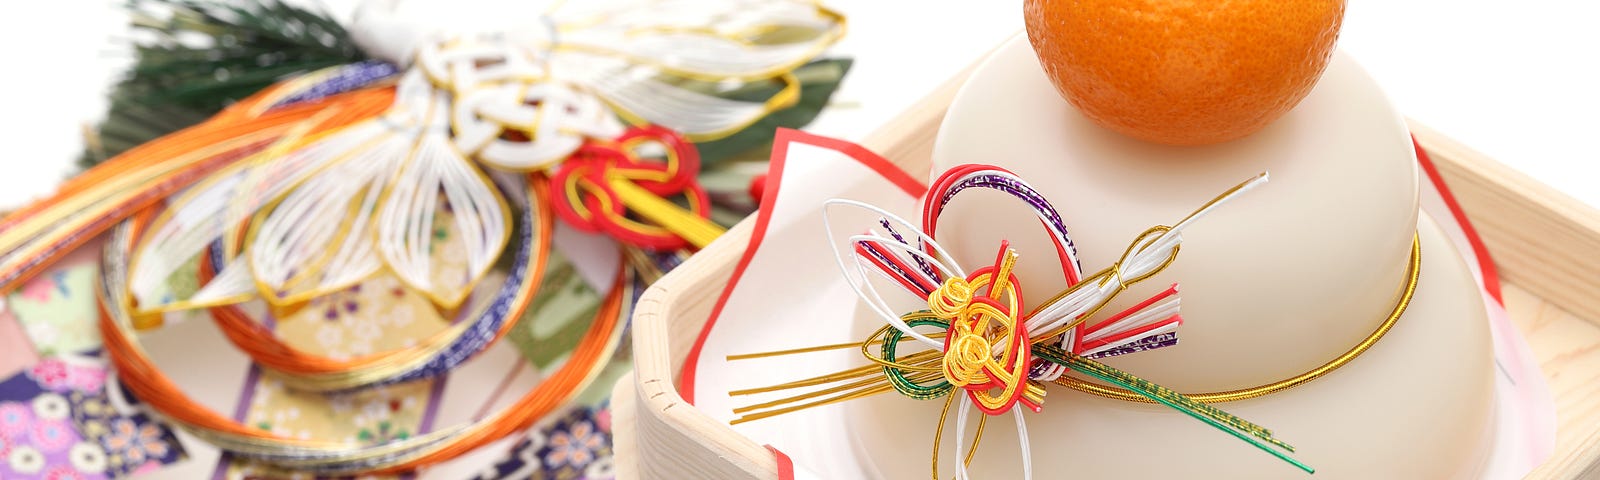 Japanese New Year’s decorations, including kagami mochi which will be broken and eaten.